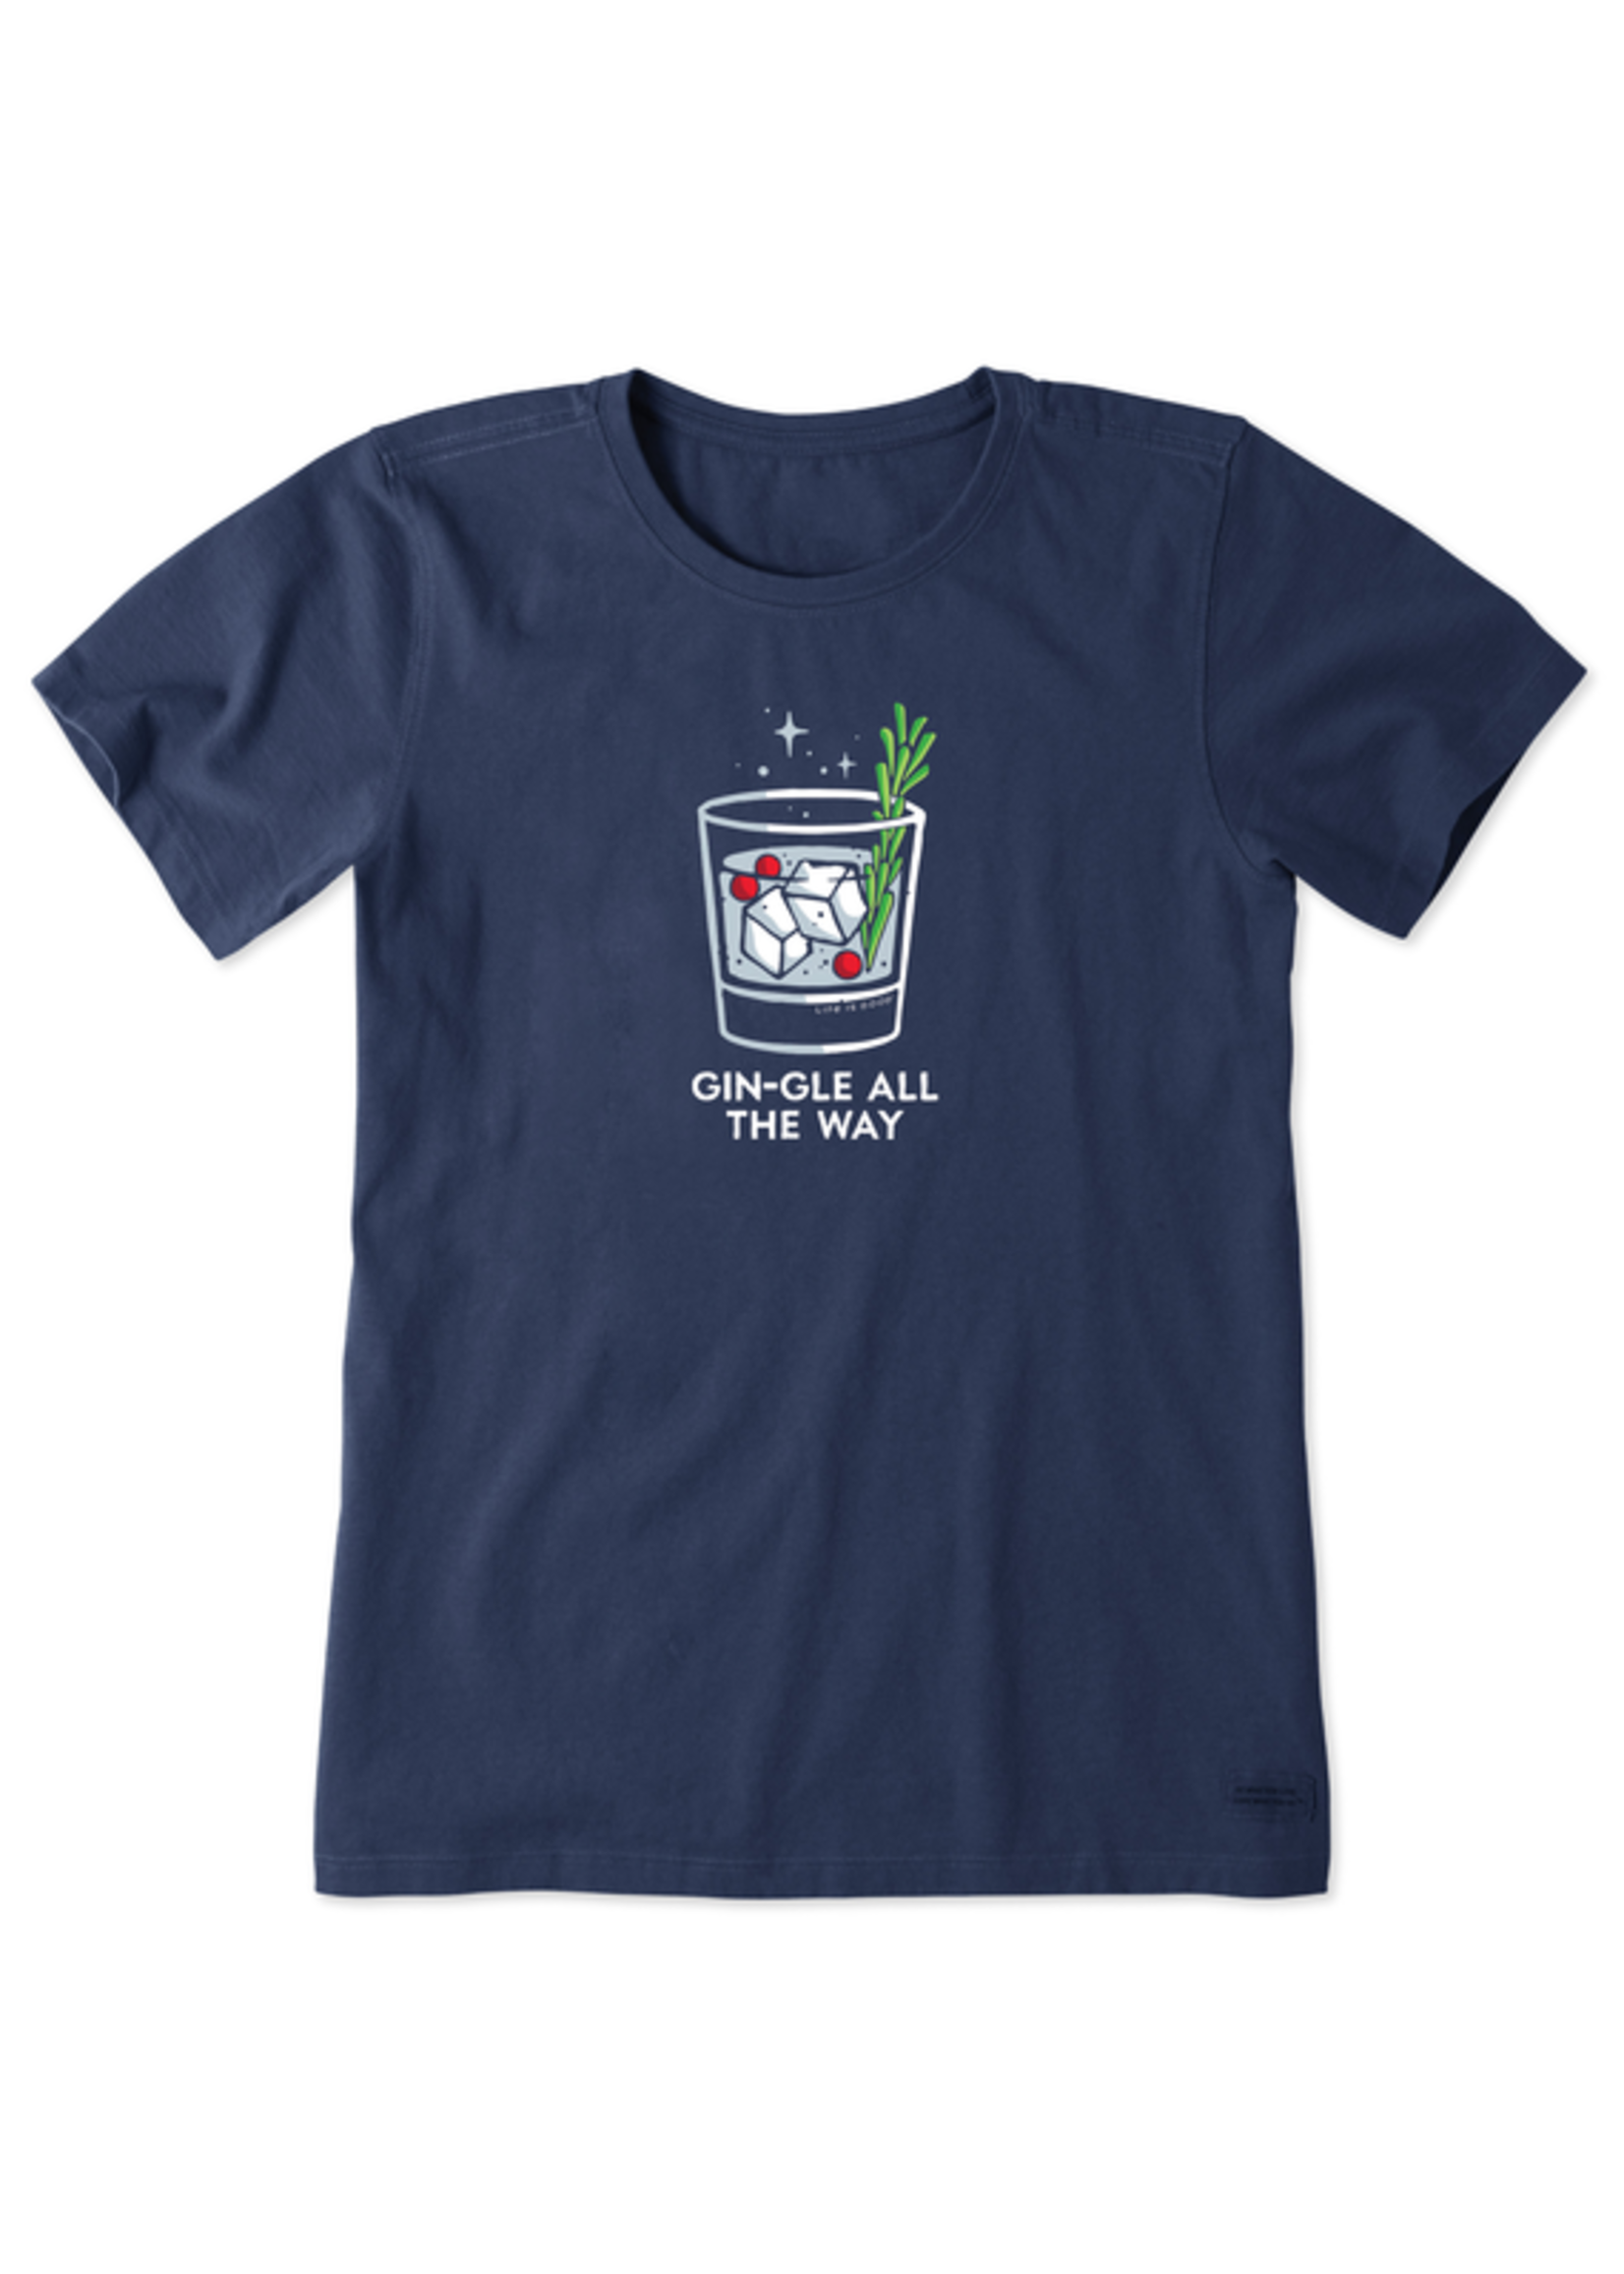 life is good Women's Tee Gin-gle All The Way